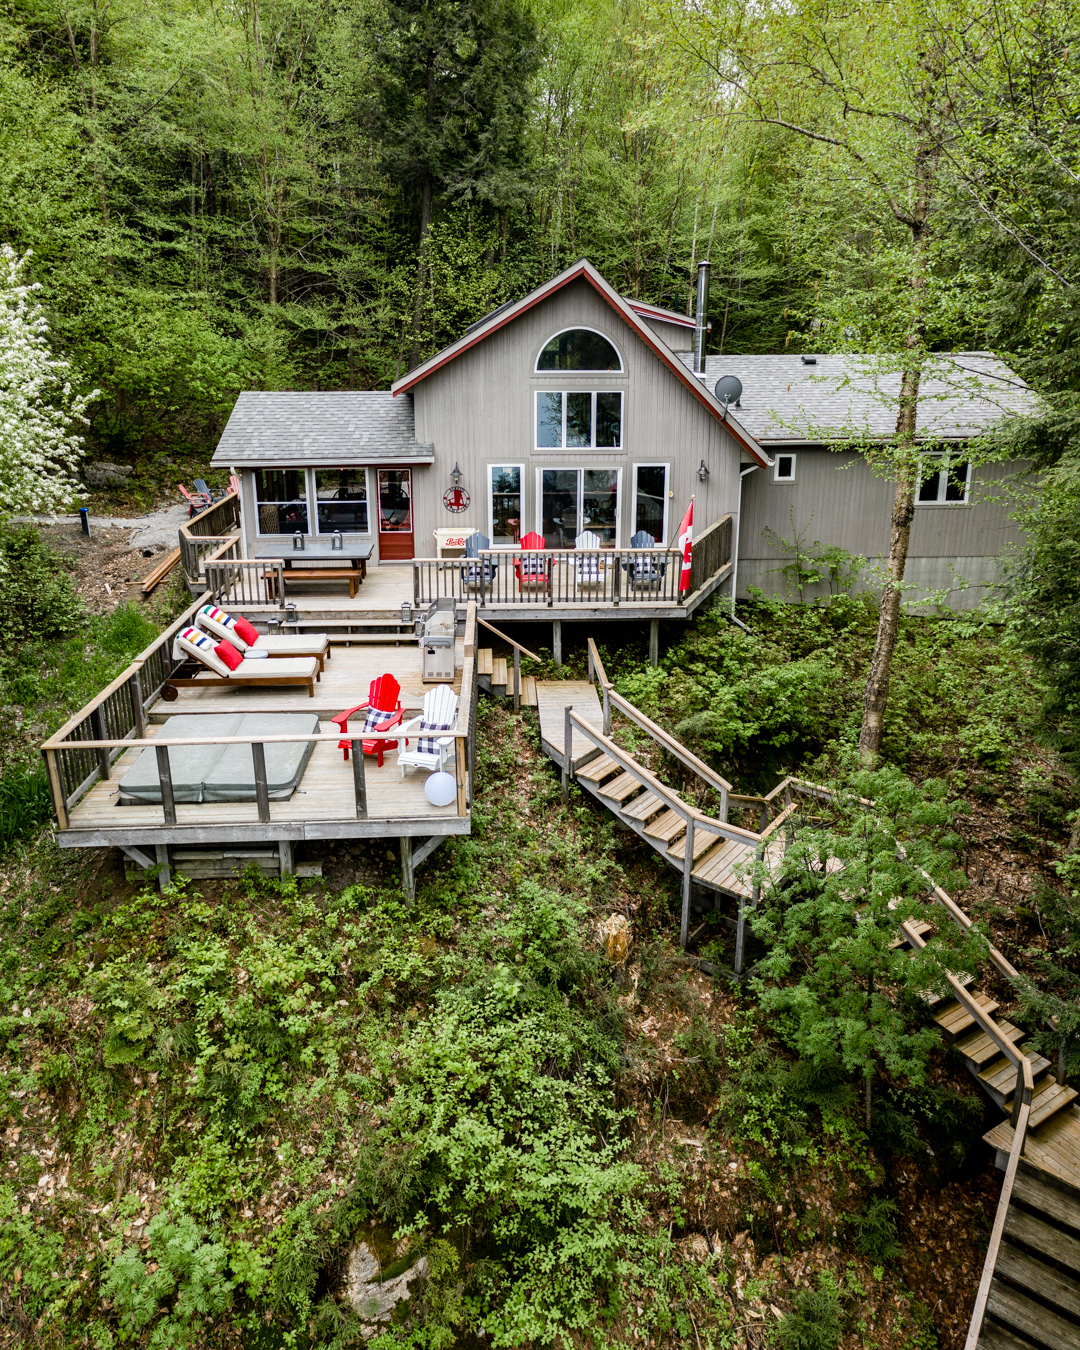 Exterior cottage shot, three decks, staircase, muskoka chairs, Bay blankets on loungers